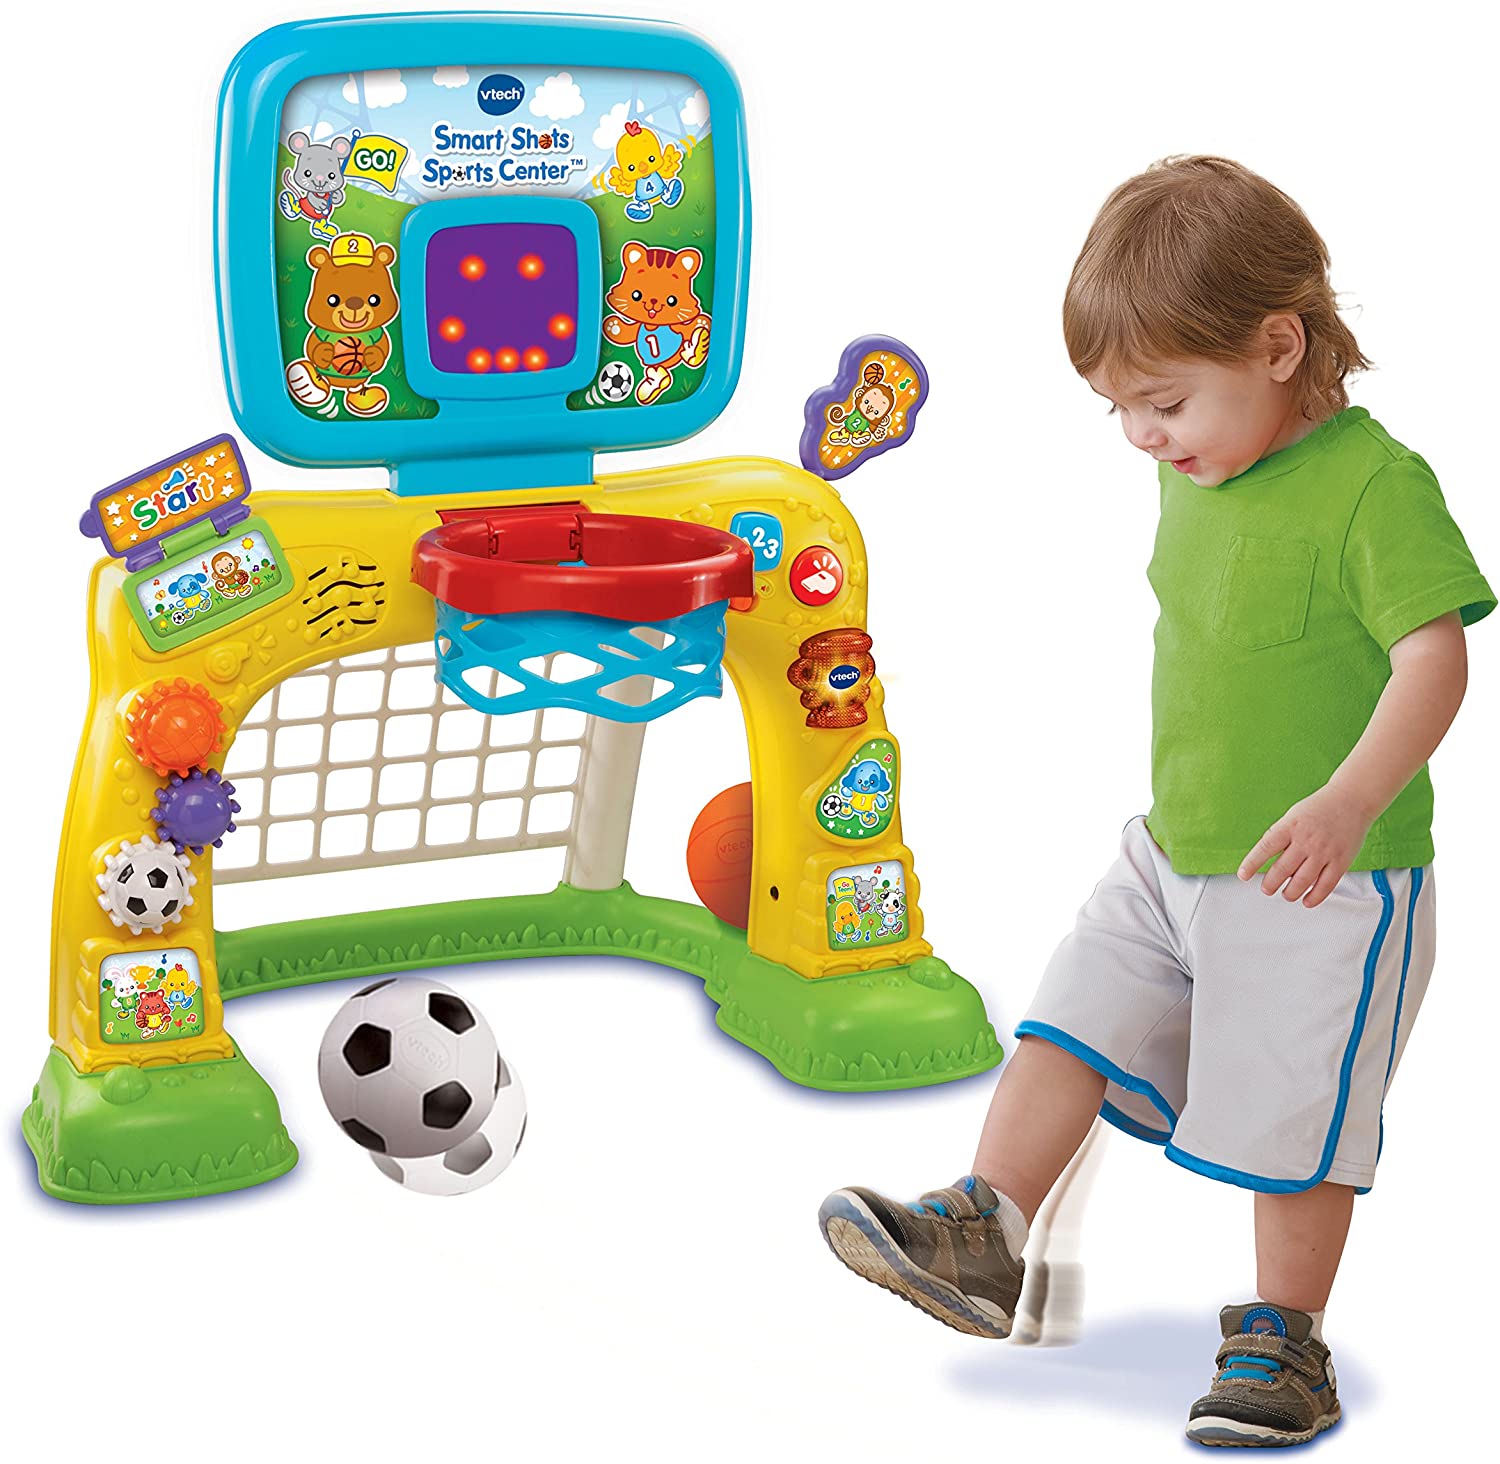 VTech Smart Shots Sports Center, Yellow - Learn About Shapes, Numbers and More